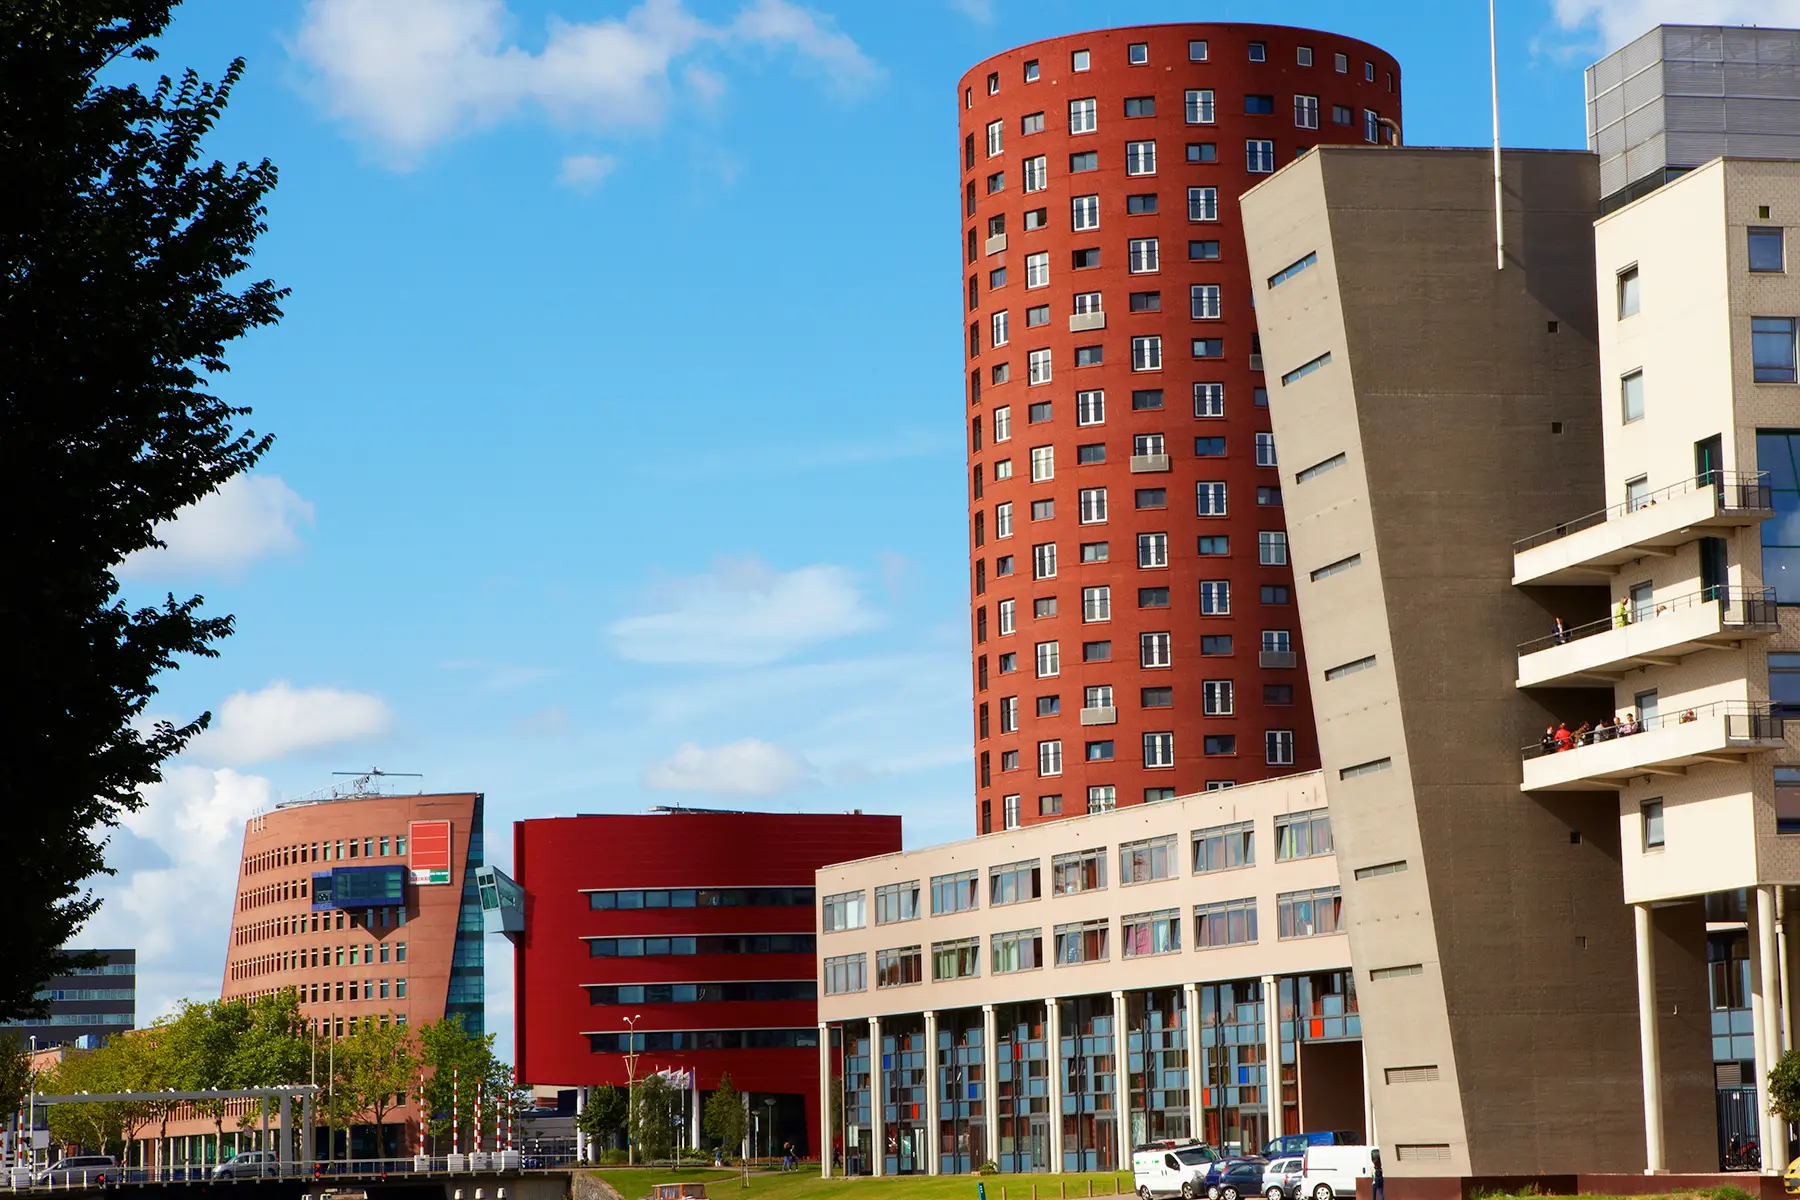 Modern university buildings at The Hague University of Applied Sciences